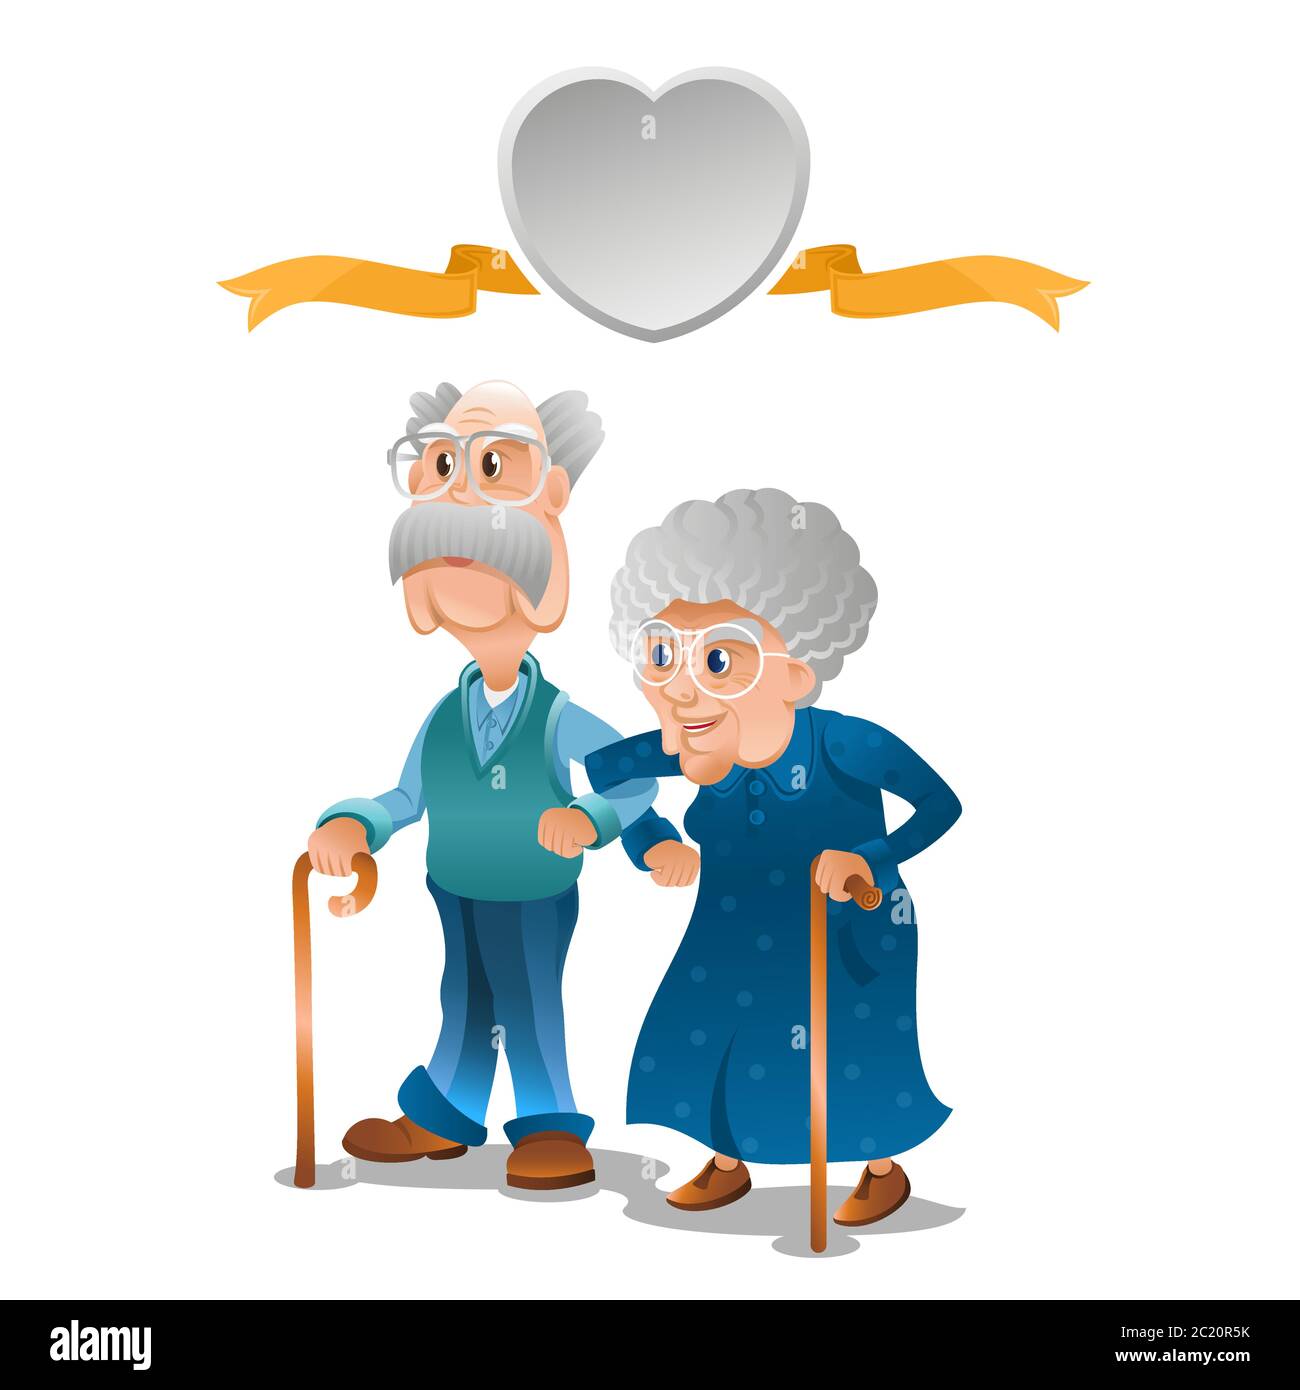 https://c8.alamy.com/comp/2C20R5K/old-grandma-and-grandpa-stand-together-arm-in-arm-couple-with-big-speech-bubble-in-heart-form-above-them-flat-style-modern-vector-illustration-gold-2C20R5K.jpg